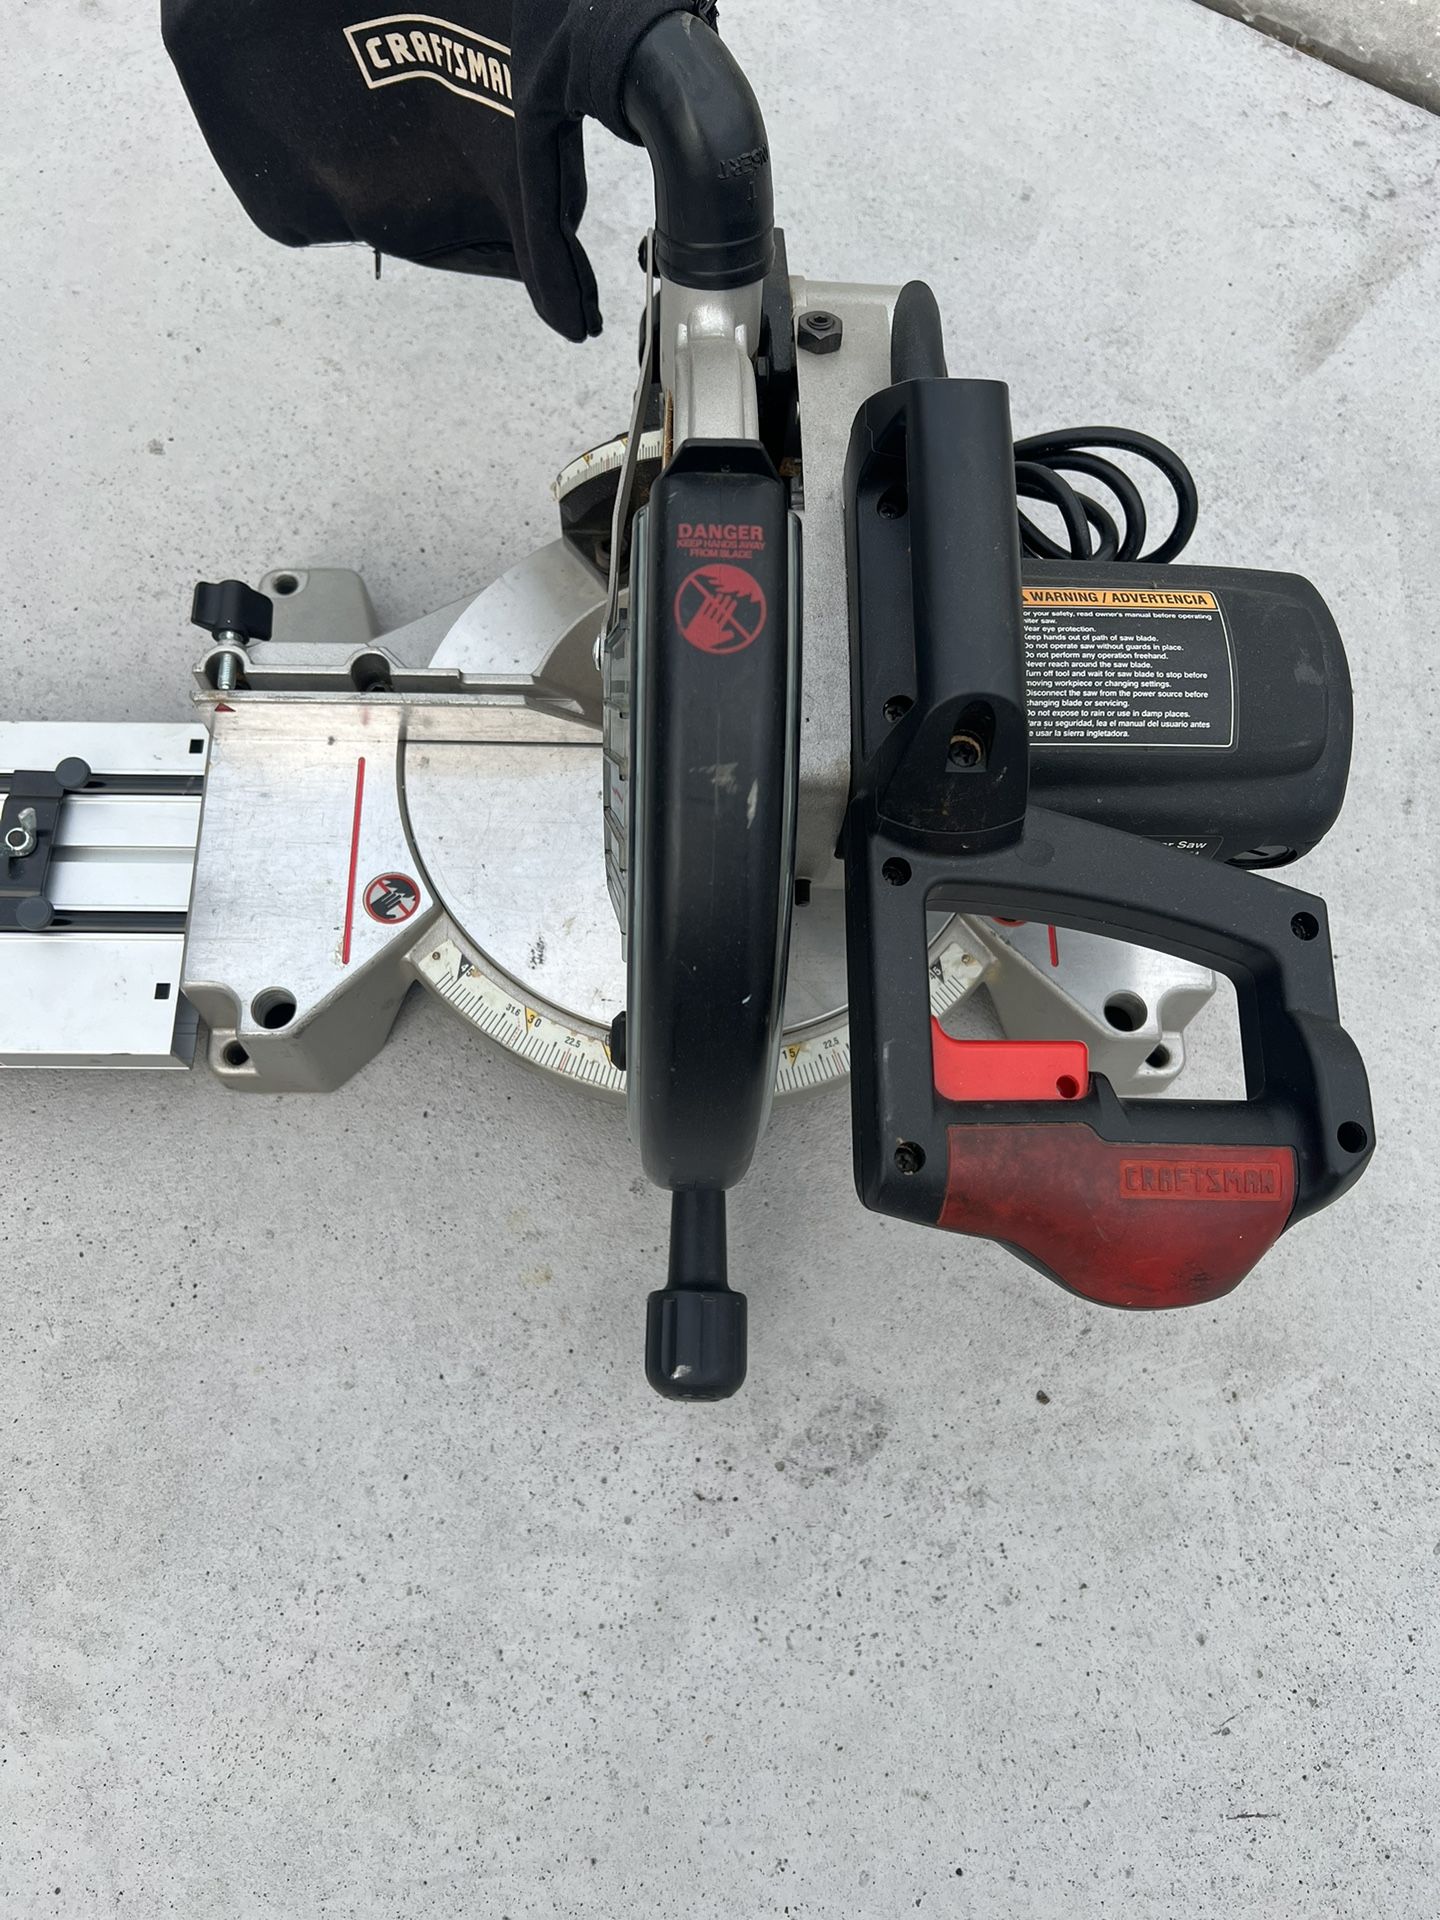 craftsman 10 Inch compound miter saw model 00 Used RAED!  Used in good cosmetic condition with minor cosmetic blemishes associated with normal